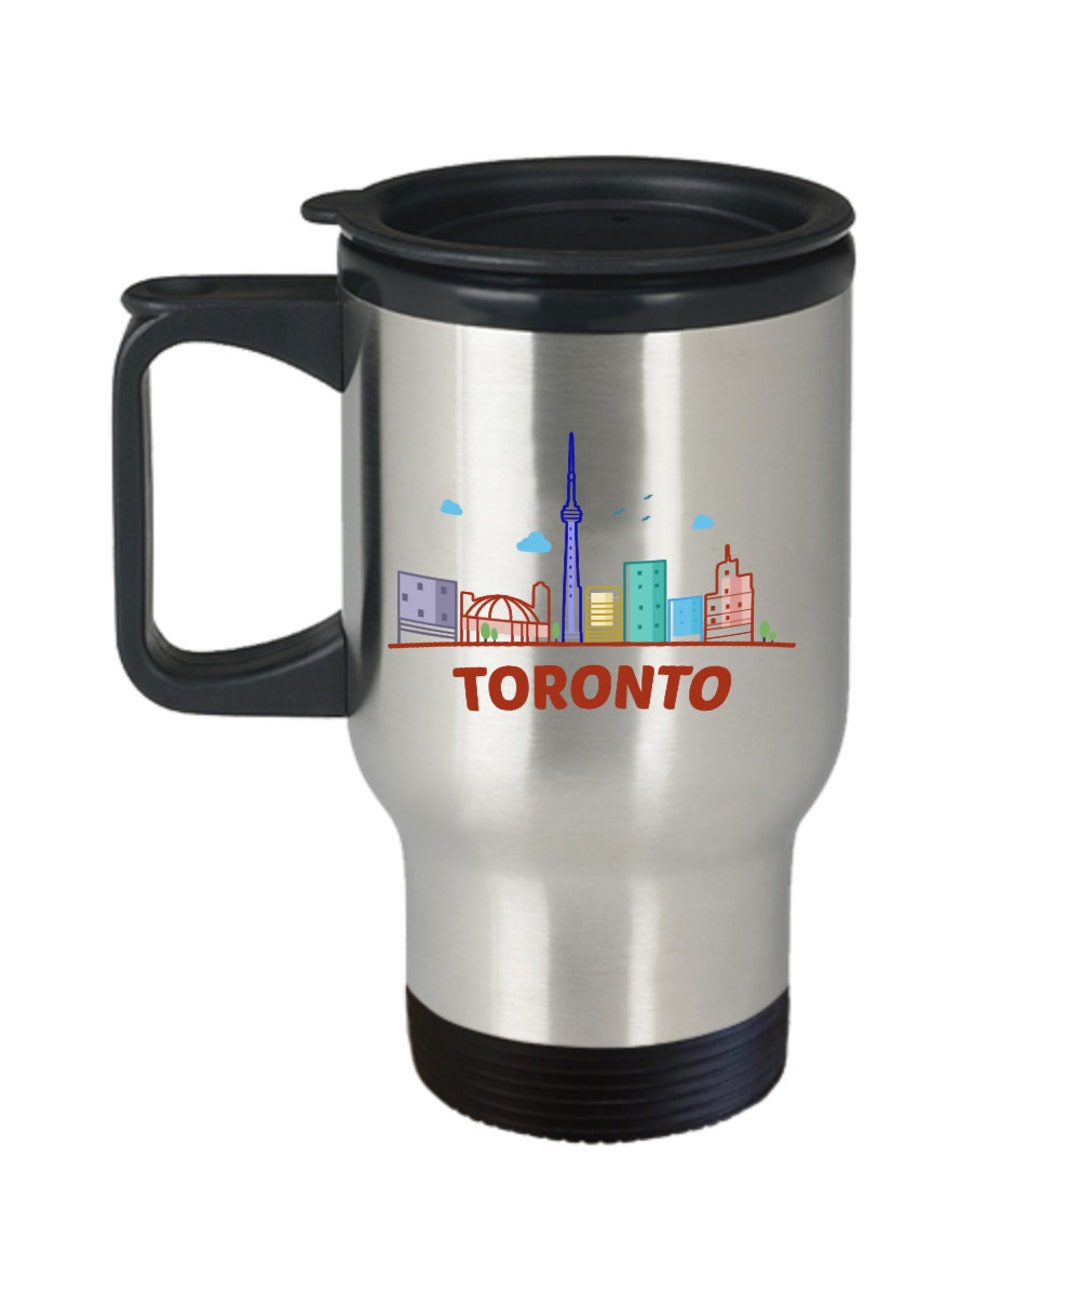 Holiday Travel Coffee Cup Hot Cocoa Tea Tumbler To Go Cup Mug